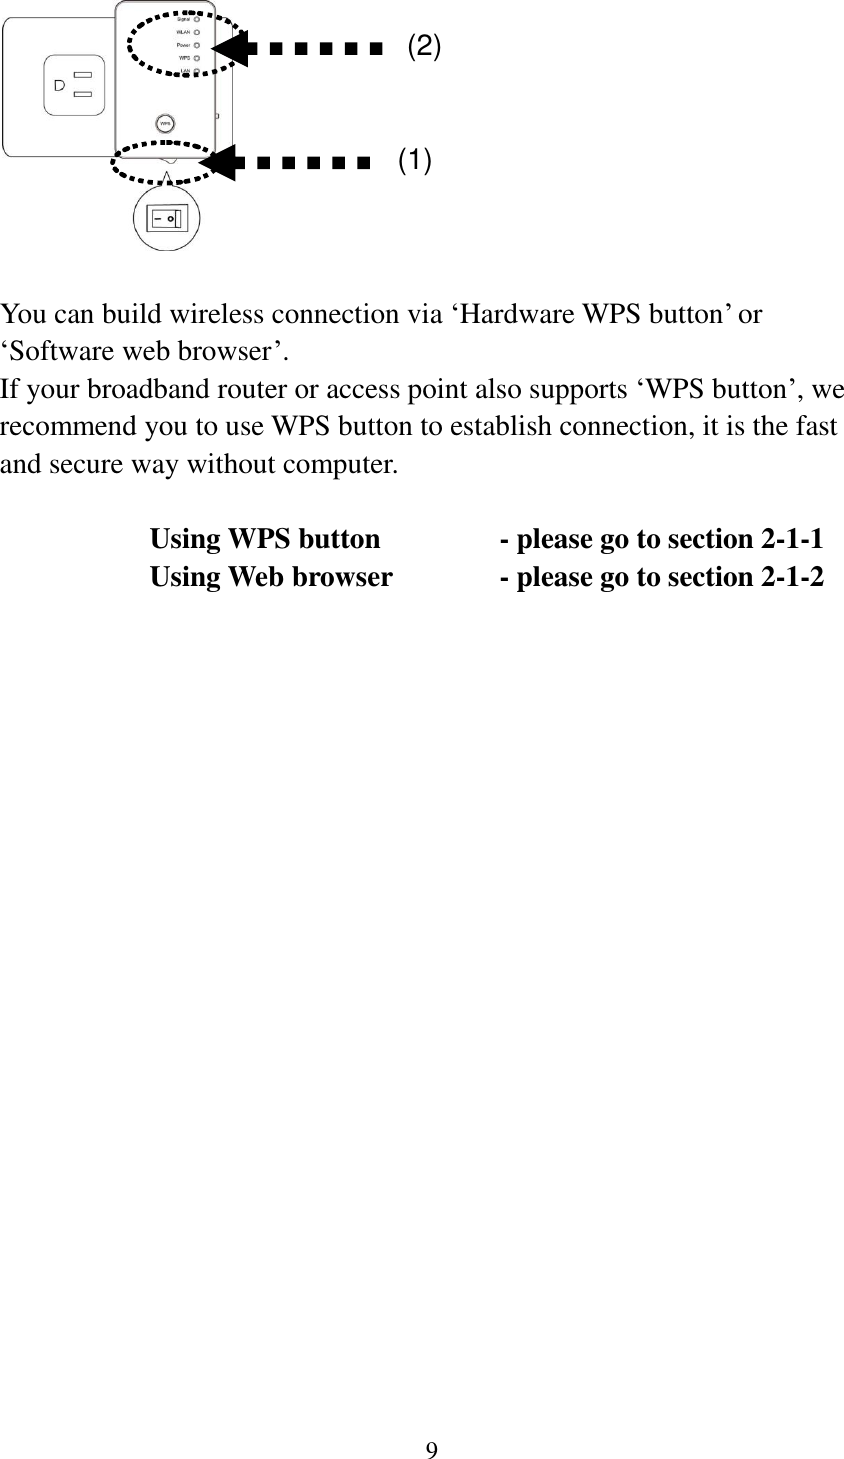 9    You can build wireless connection via „Hardware WPS button‟ or „Software web browser‟. If your broadband router or access point also supports „WPS button‟, we recommend you to use WPS button to establish connection, it is the fast and secure way without computer.    Using WPS button      - please go to section 2-1-1       Using Web browser     - please go to section 2-1-2     (2) (1) 